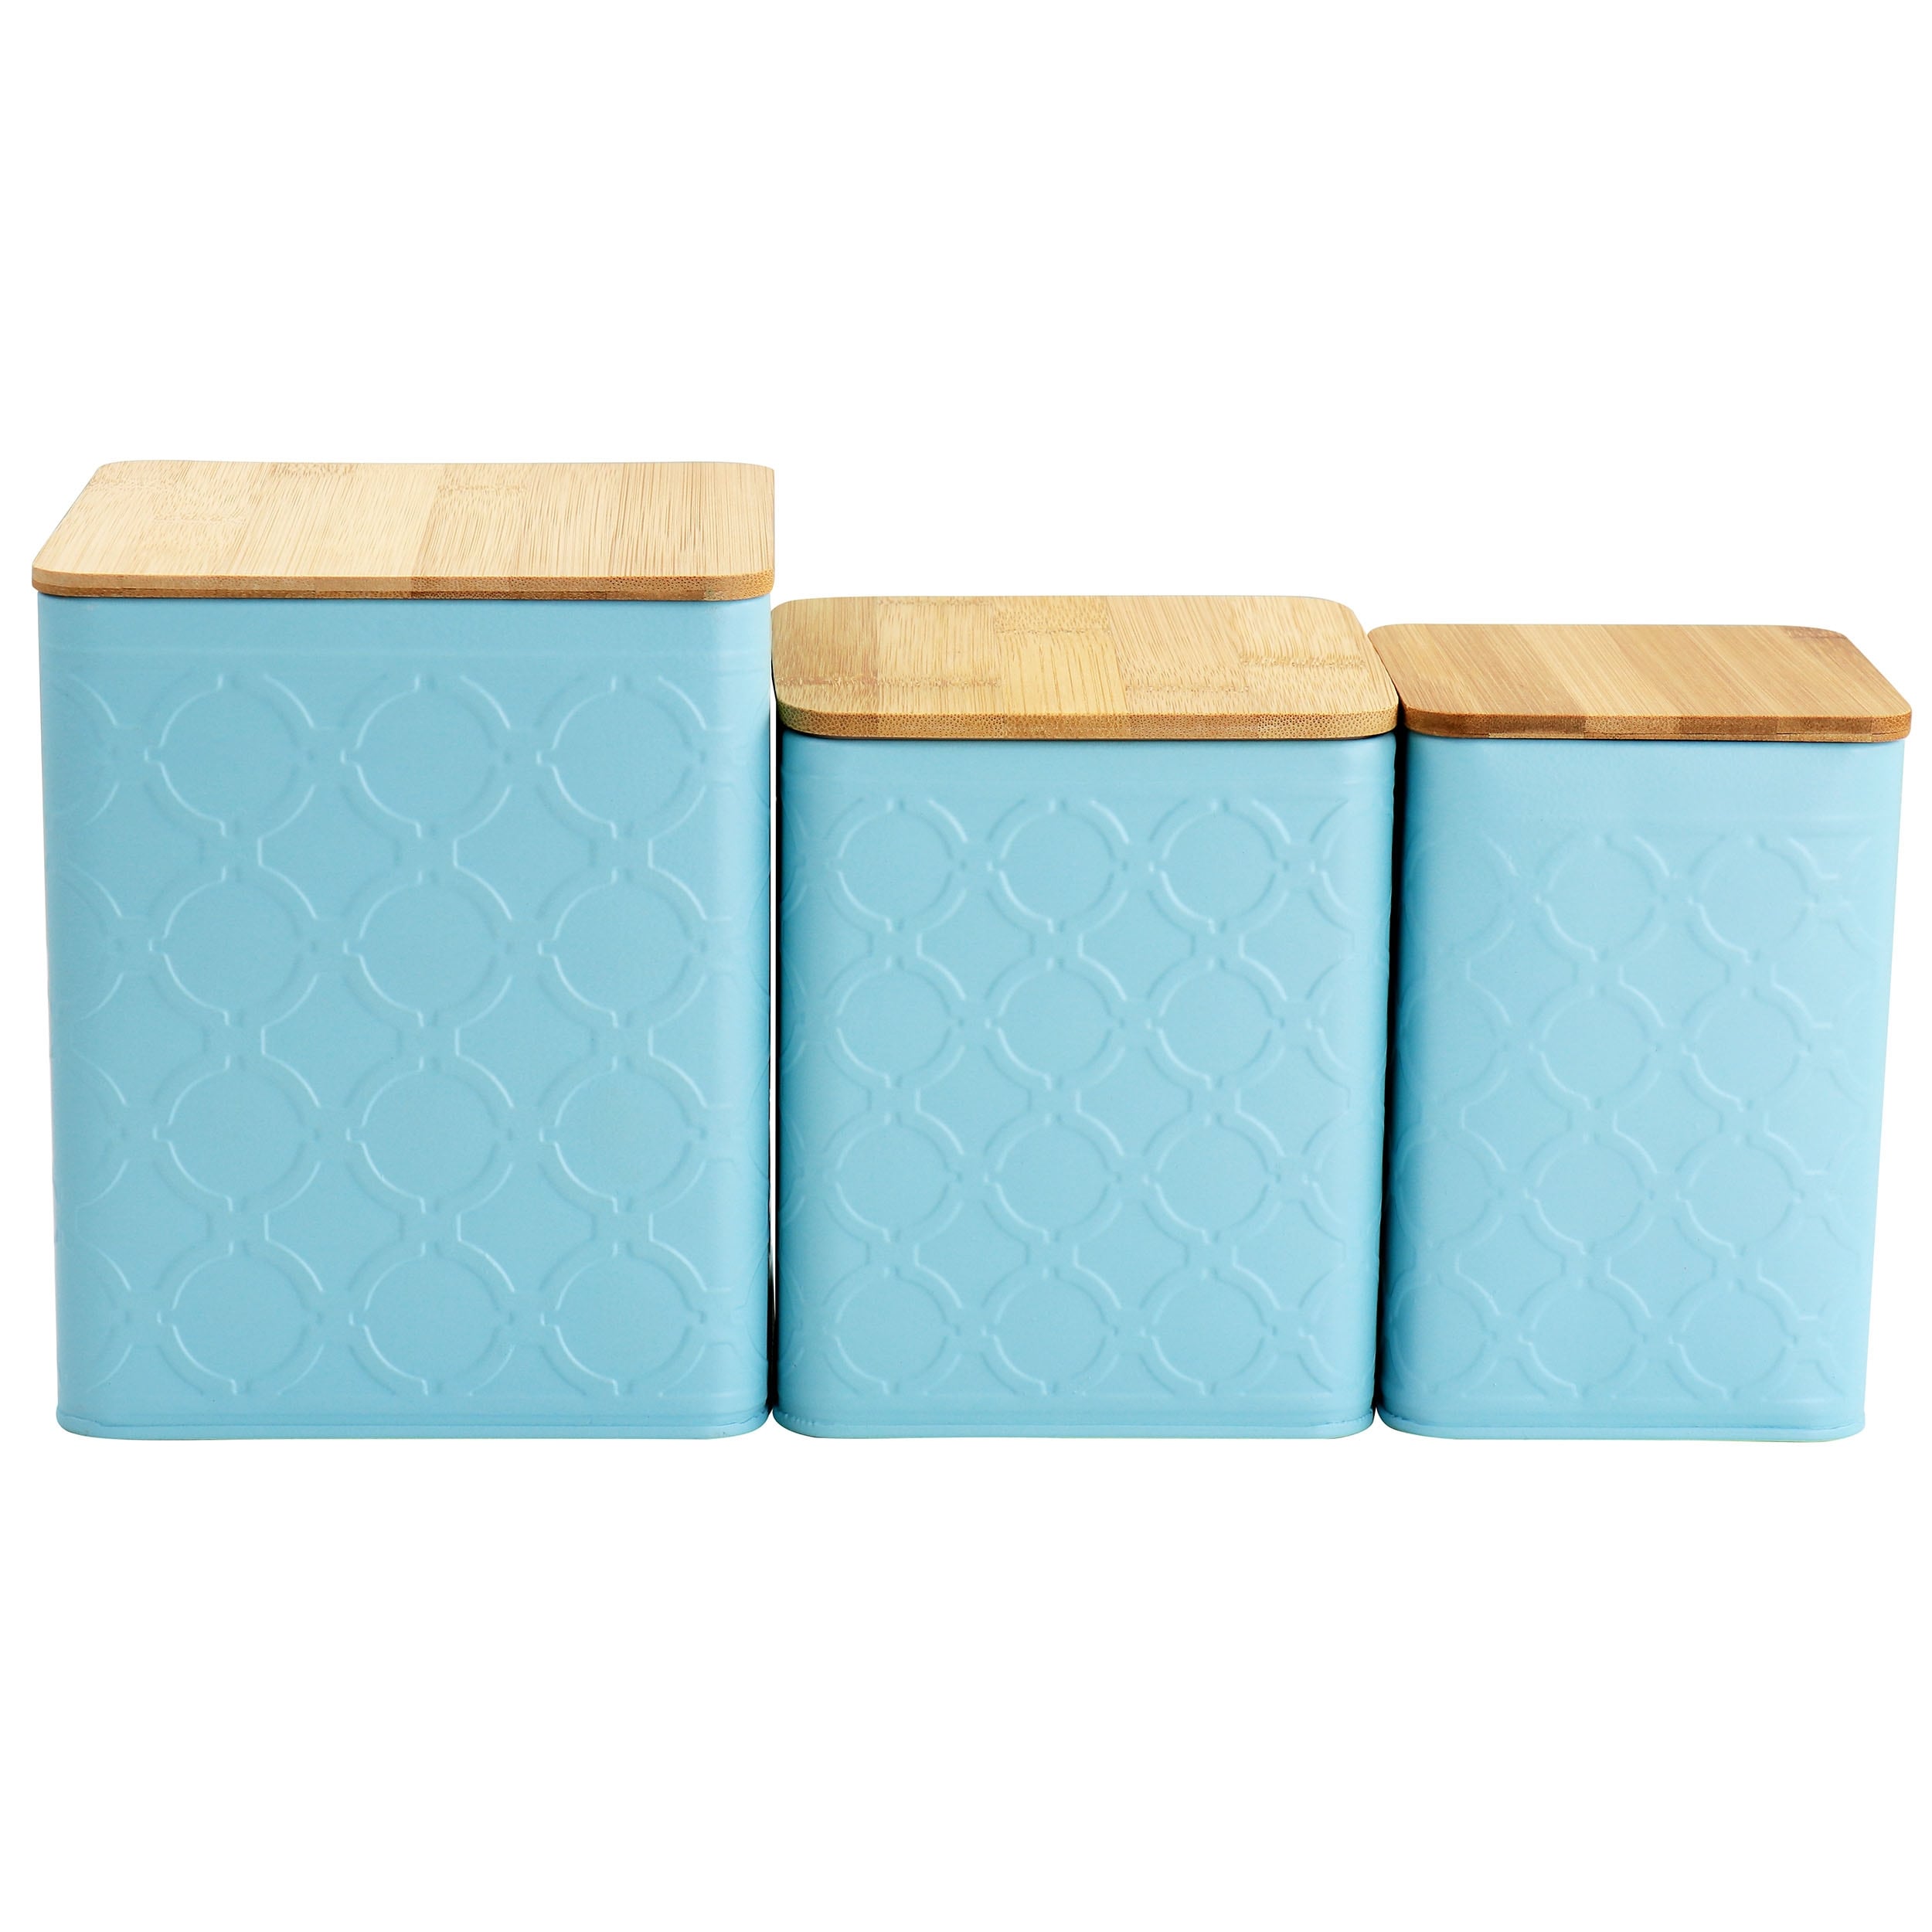 Premius Airtight 3-Piece Kitchen Glass Canister Set, Turquoise Blue